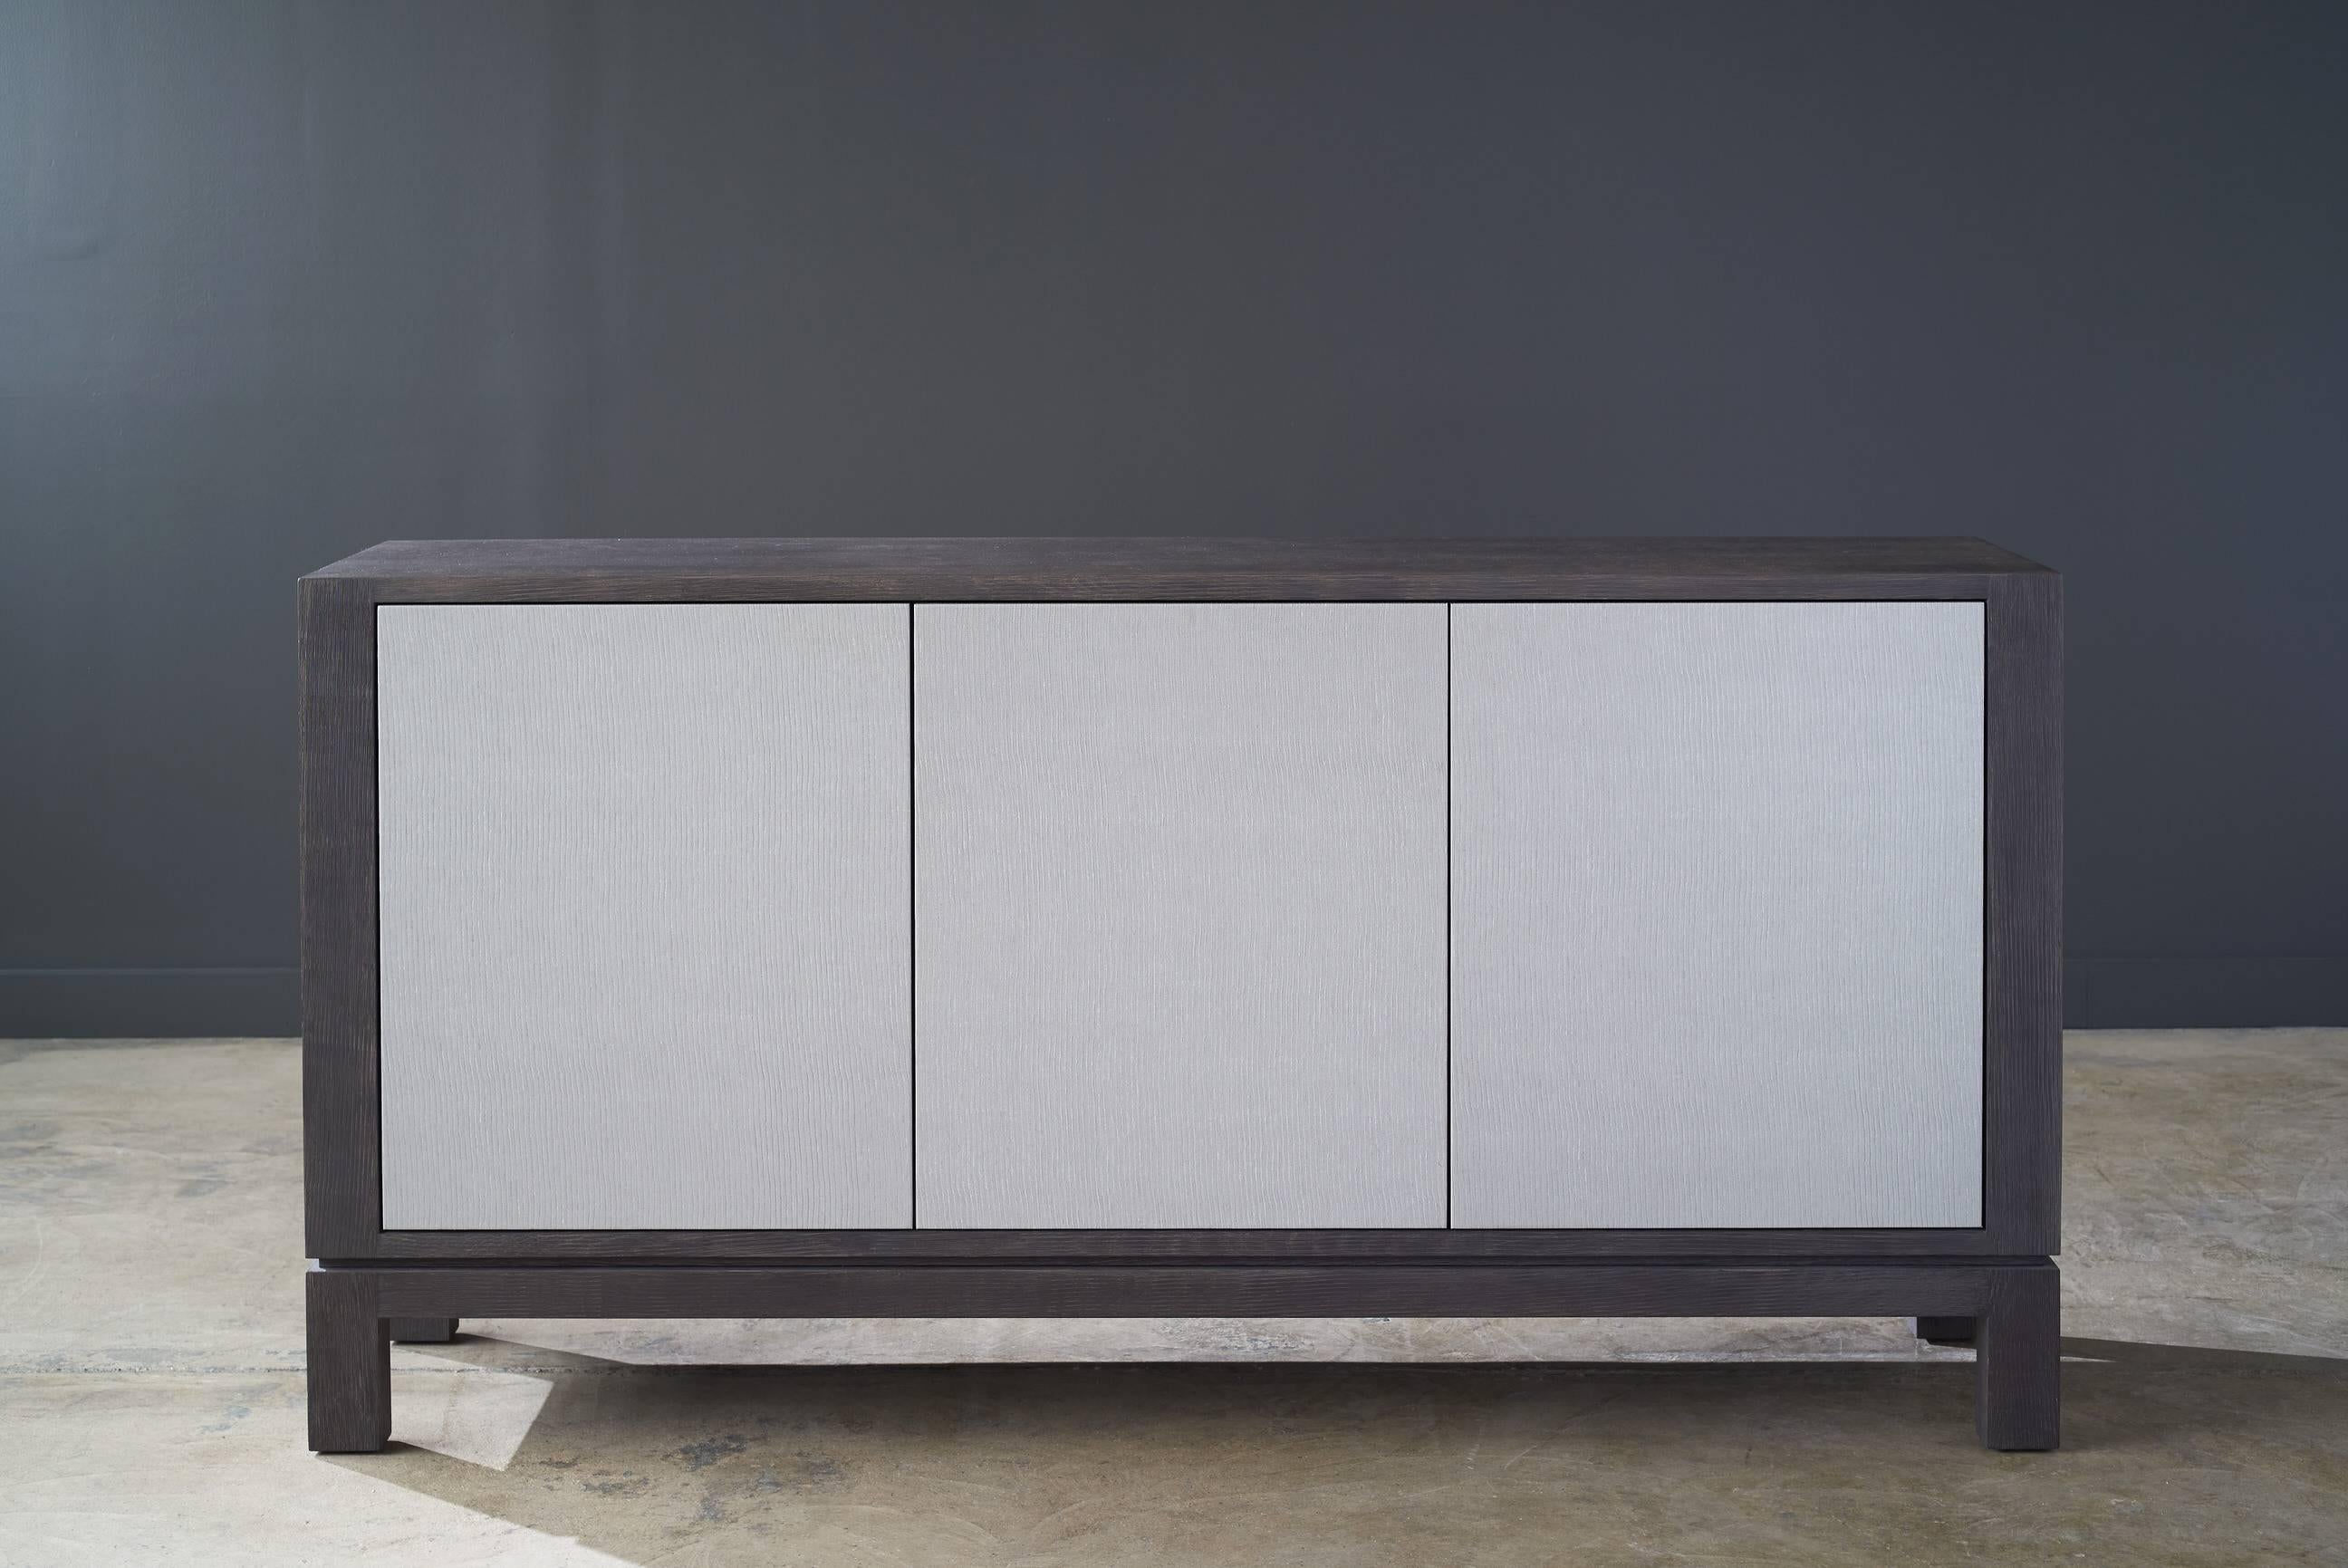 Elevate your home with the clean lines of our Madison sideboard. It is handcrafted with drift oak and wrapped with Innovations Taos Perla in sophisticated style.

Shown in drift oak and Innovations Taos Perla. Measures: 72in x 16in x 36in